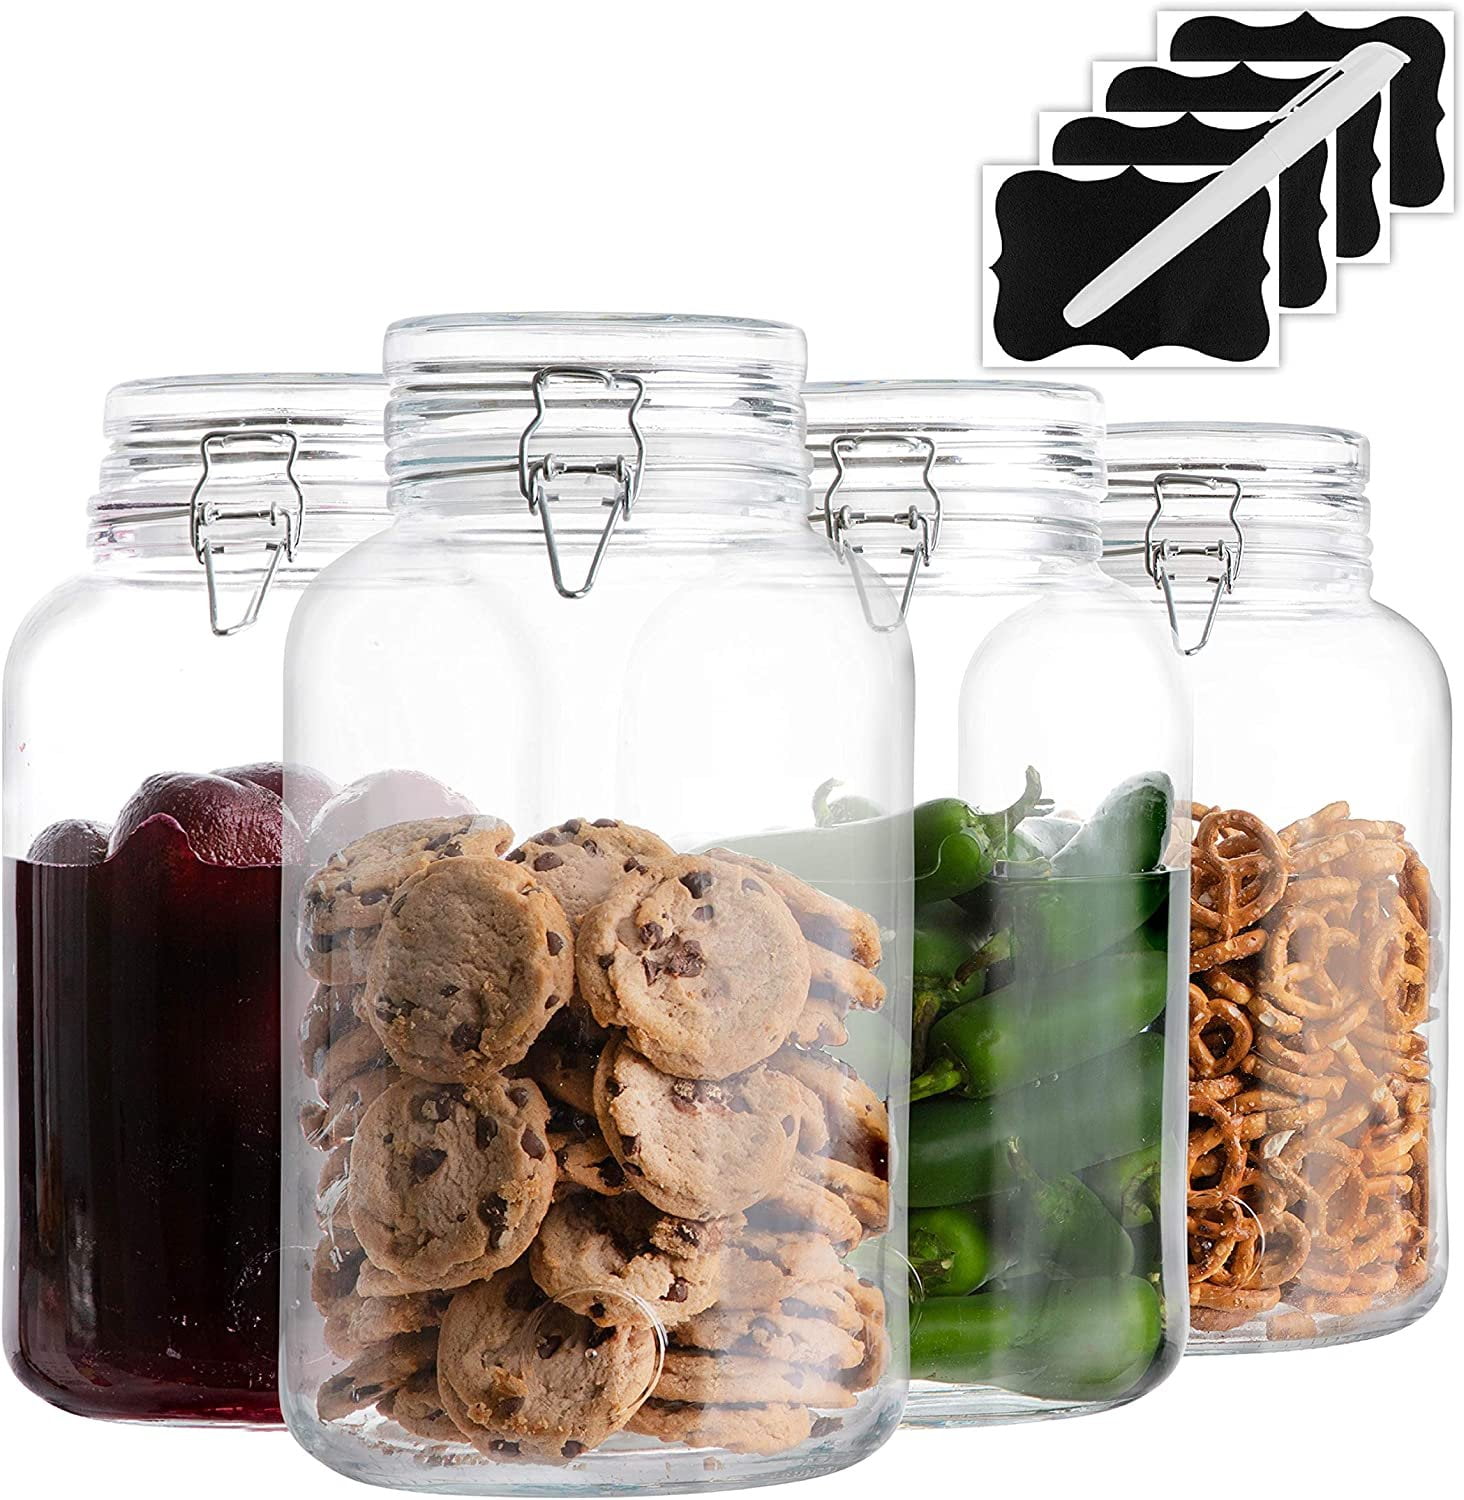 Glass Jars with Airtight Lid | Glass Airtight Food Storage Containers |  Clear Leak Proof Rubber Gasket and Clamp Lid [Set of 2-1 Gallon Jars]